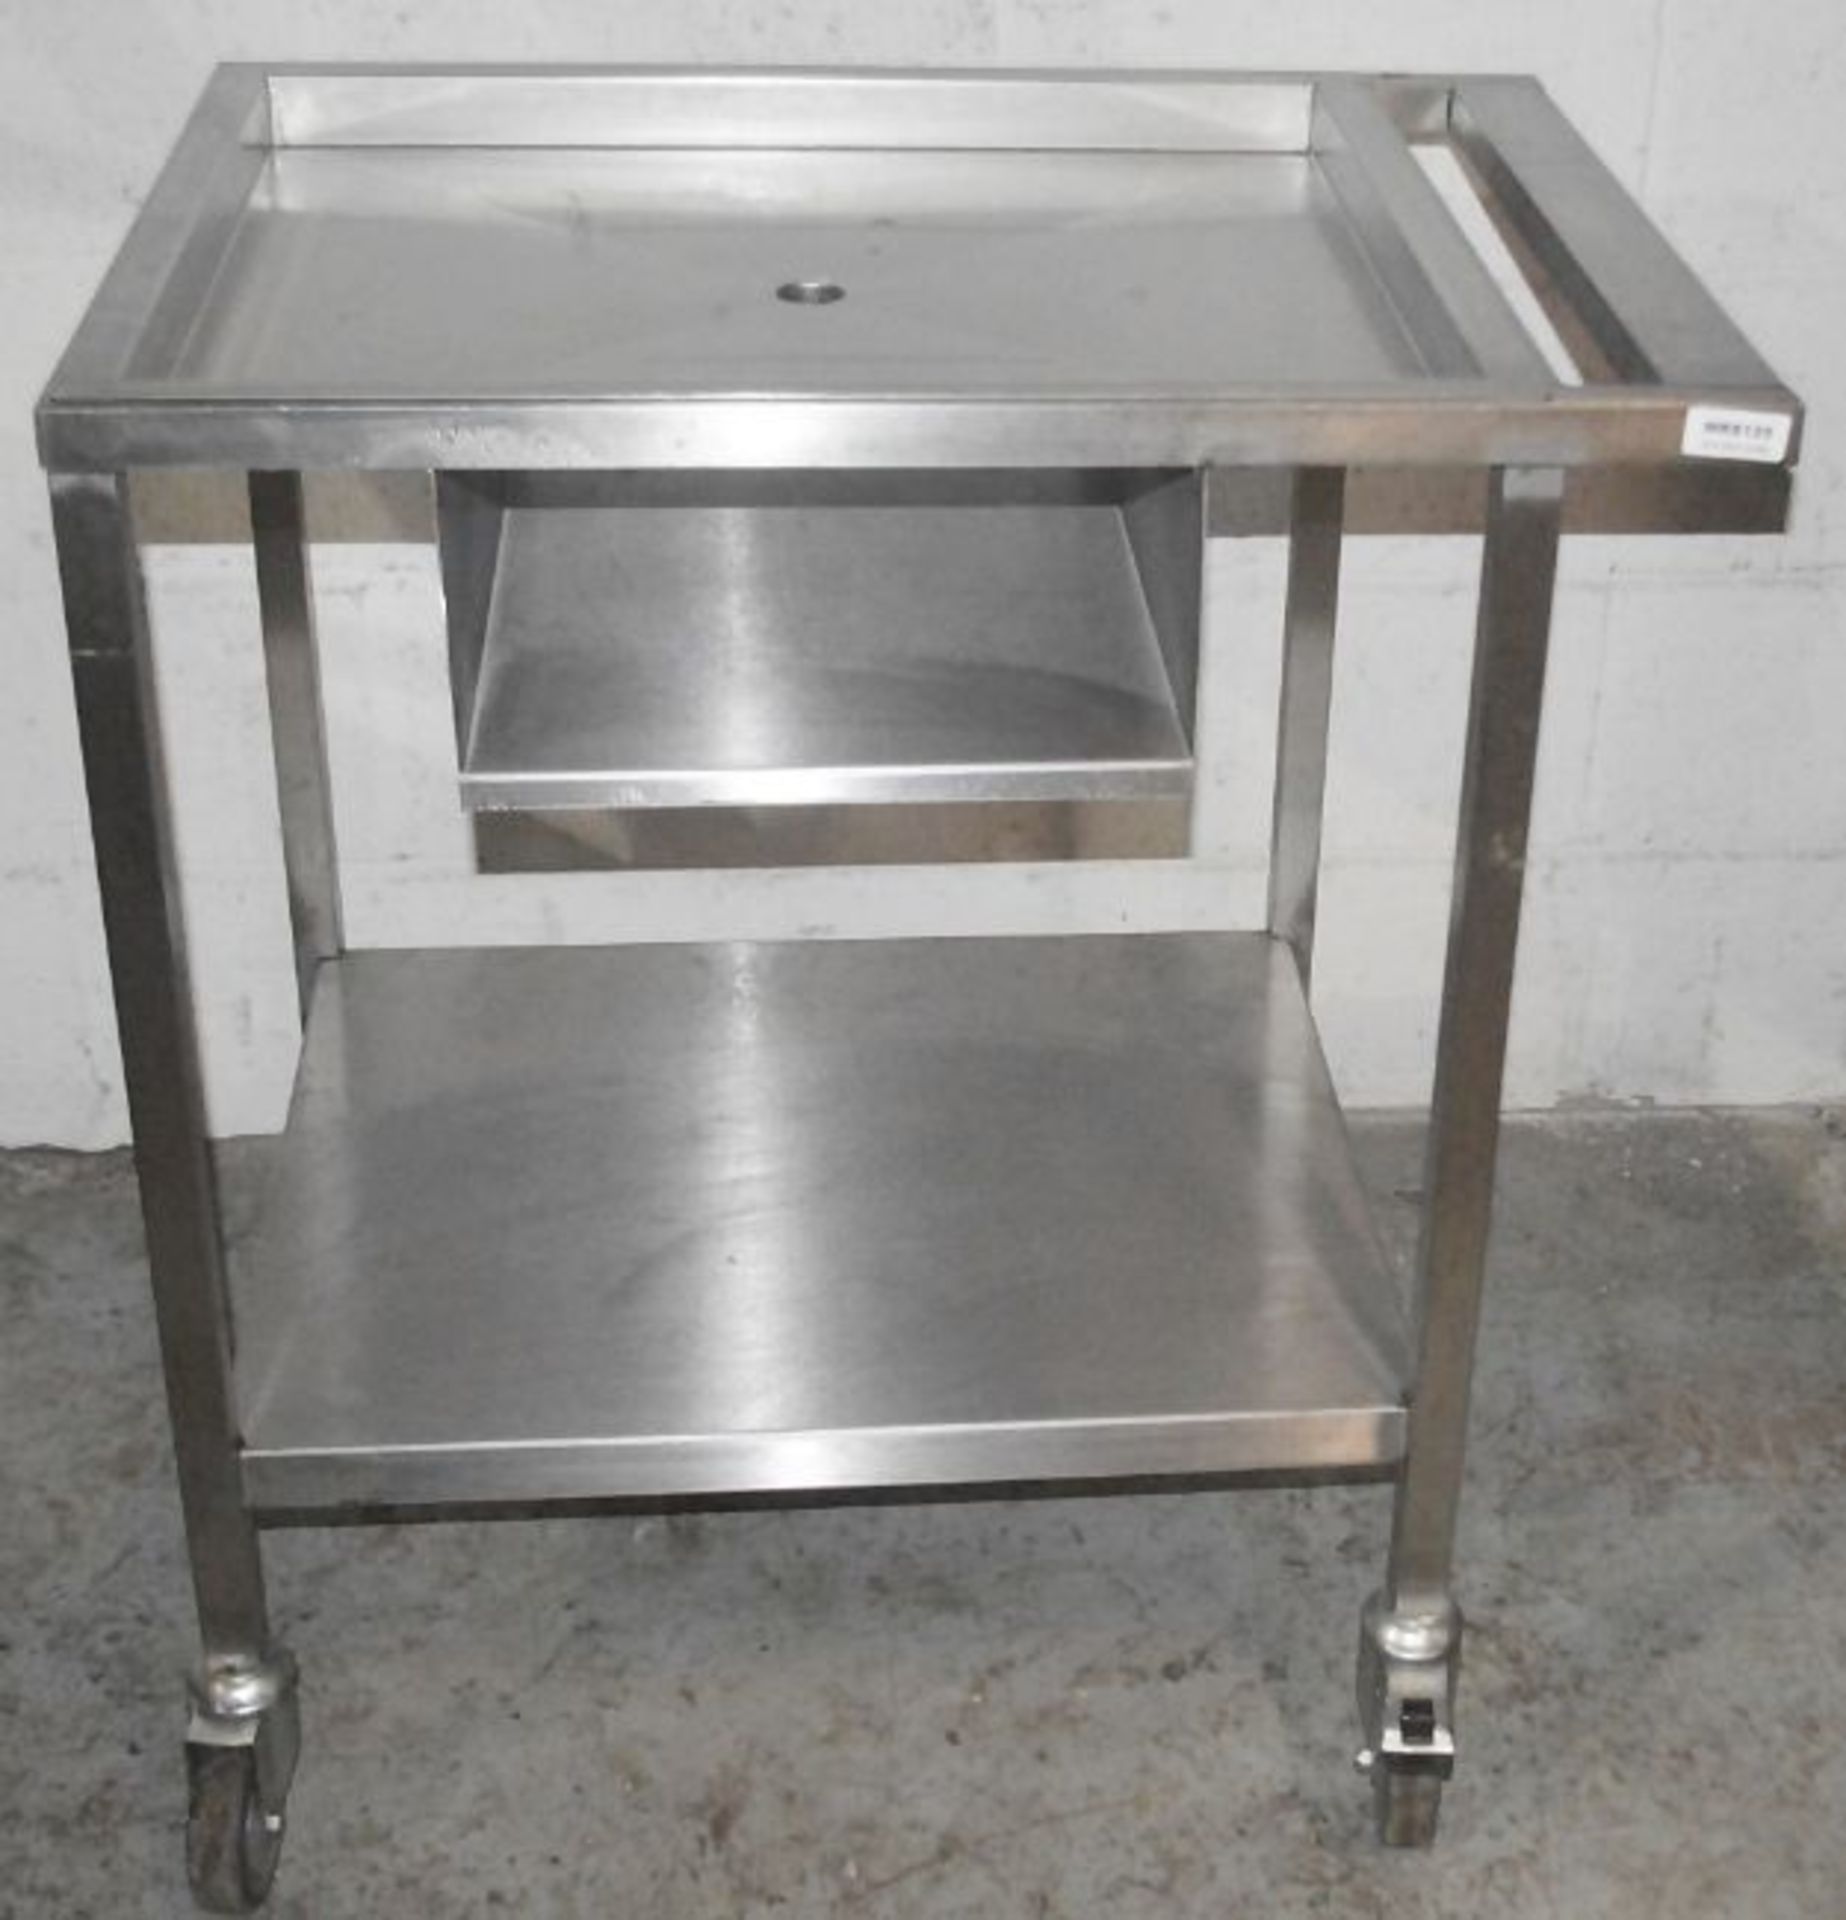 1 x Stainless Steel Commercial Kitchen Spooling Table - Dimensions: H88 x W80 x D61cm - Very - Image 2 of 3